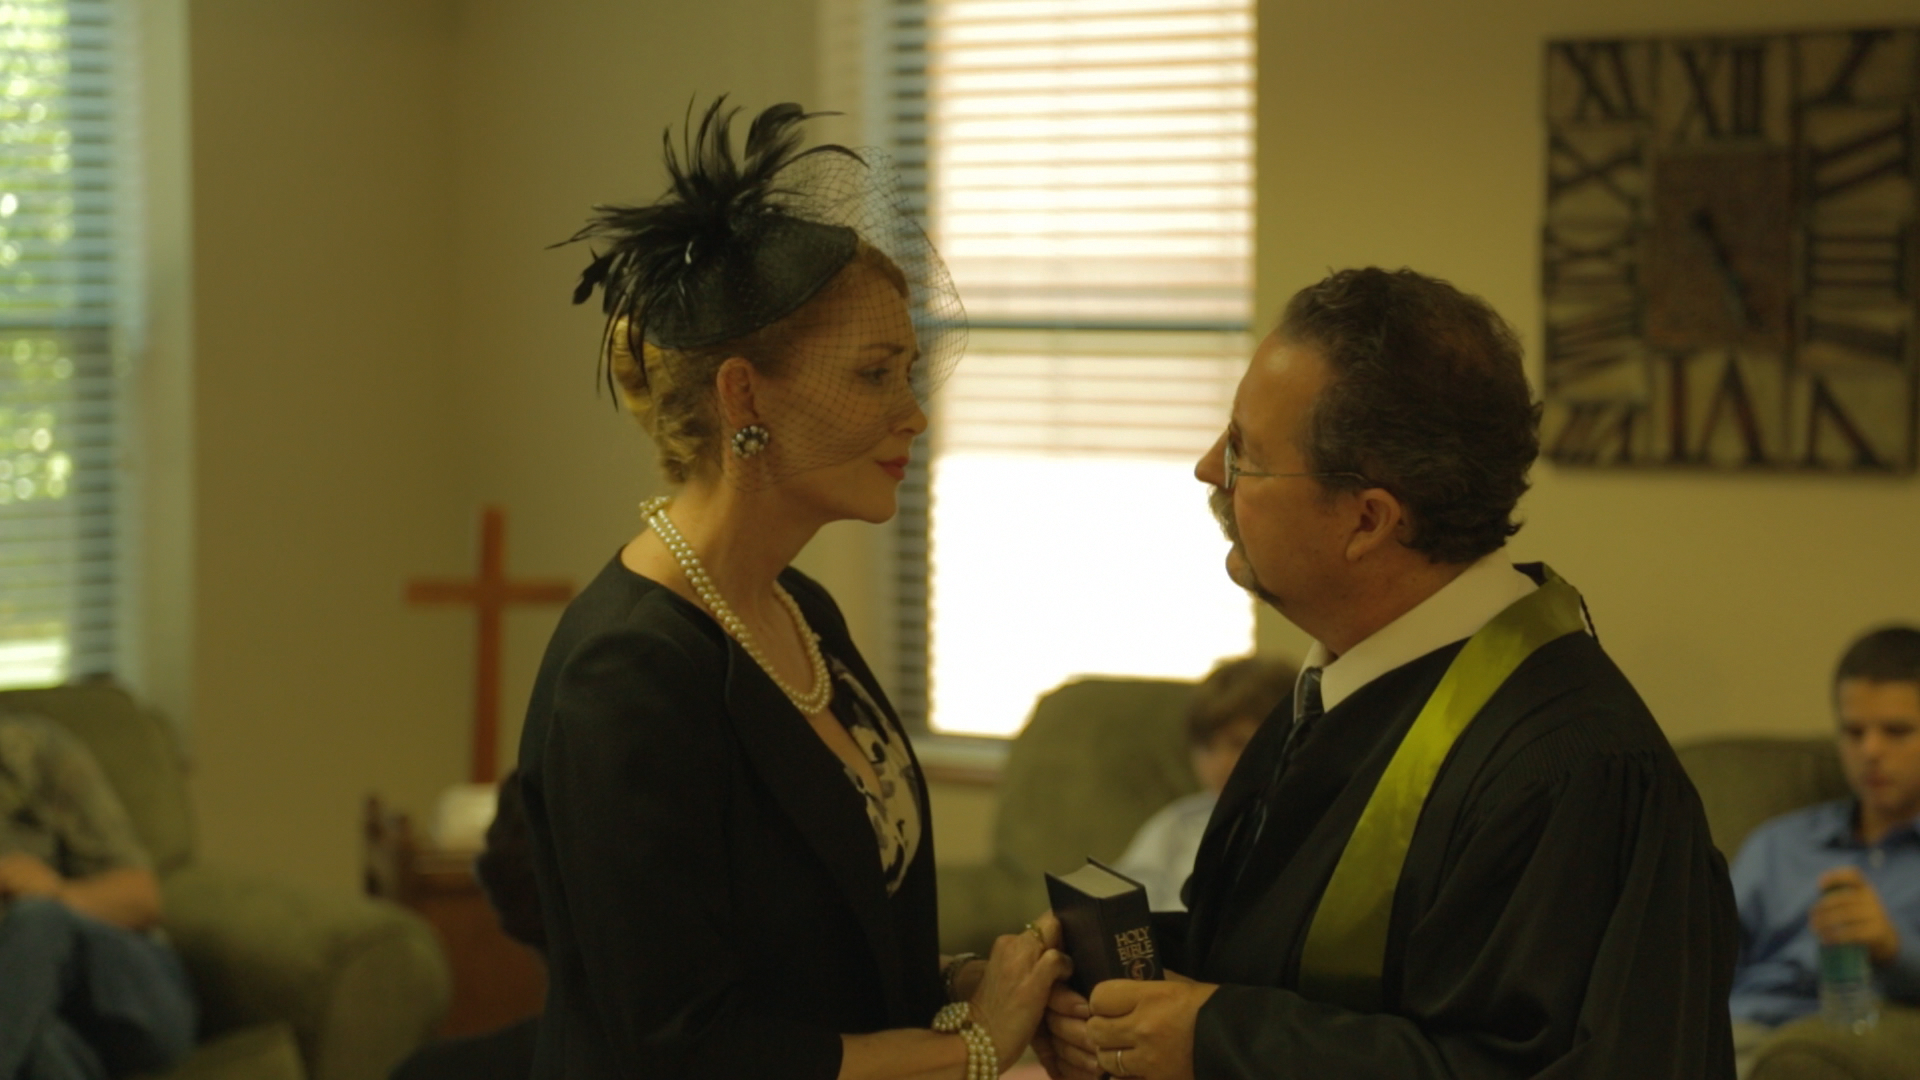 THE LONG DRIVE HOME. Susan Tate (Laurie Cummings) confers with the preacher (Herman Lee Brown). Written and directed by William Tyler. (2013)